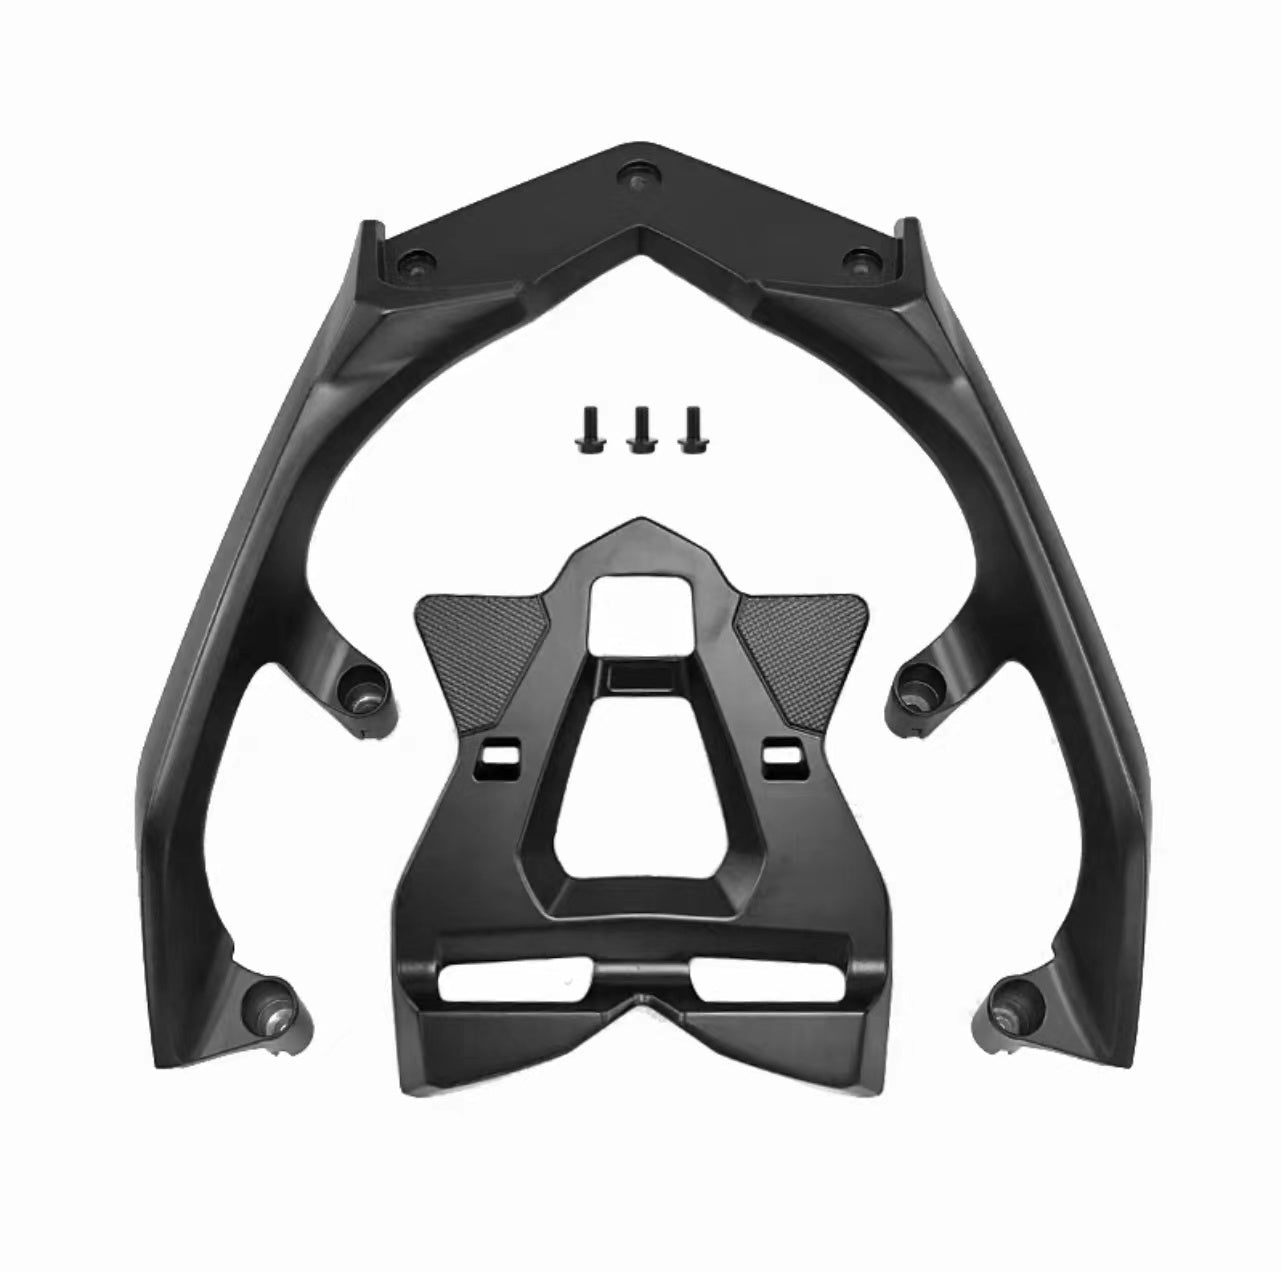 Top Rack Rear Carrier Luggage Rack Tailbox Fixer Holder for Yamaha TMAX530 560 DX SX 2017-2021